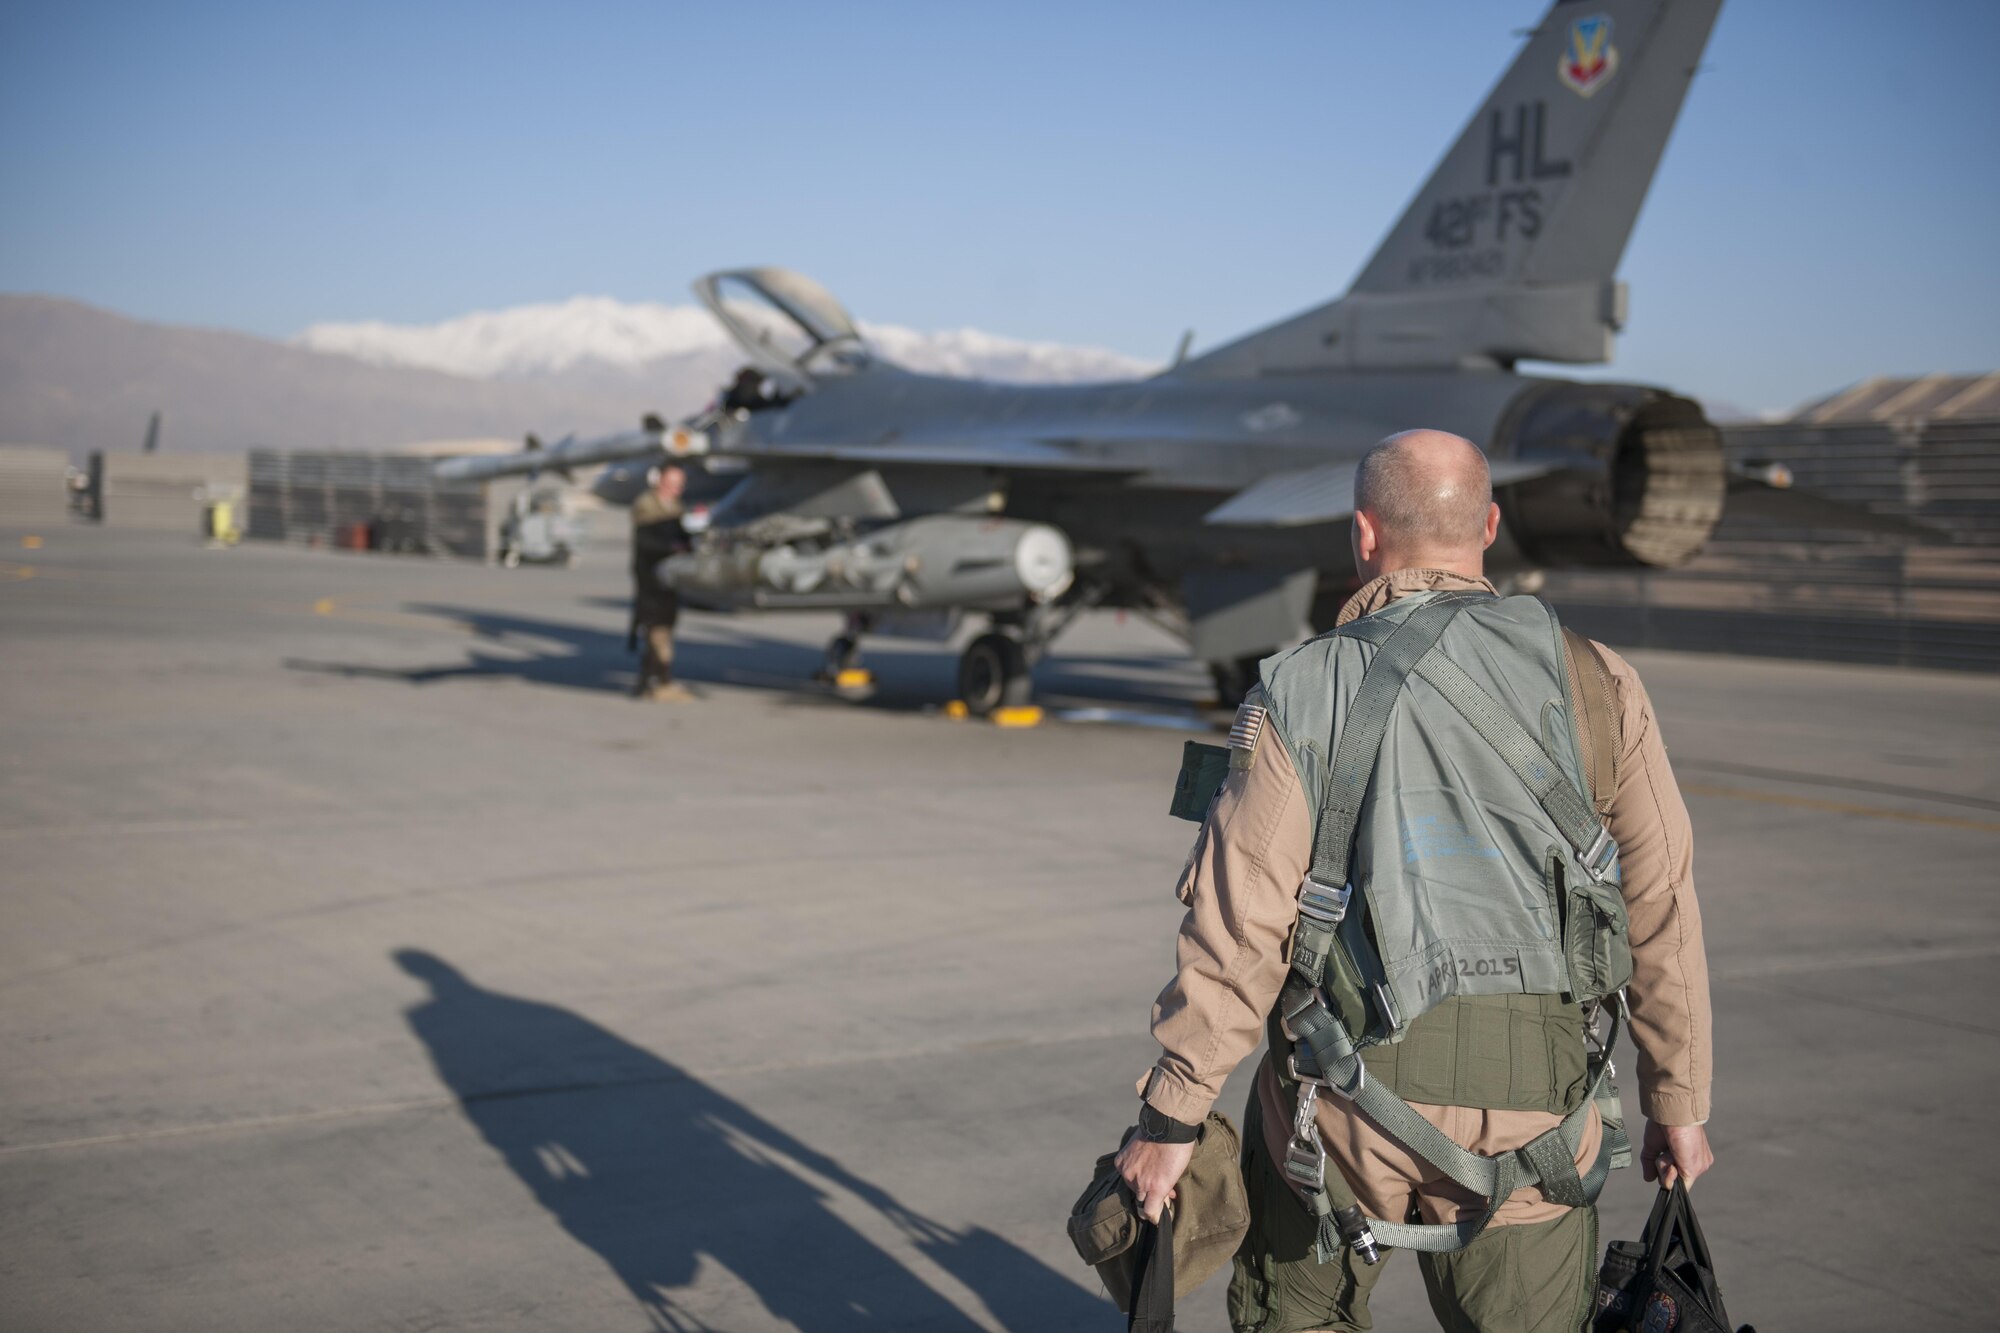 Col. Henry Rogers, 455th Expeditionary Operations Group commander, walks to his F-16 for a sortie with the 421st Expeditionary Fighter Squadron at Bagram Airfield, Afghanistan, Nov. 27, 2015. Rogers reached the 3,000-flying hour milestone and 1,000 combat-hour milestone while serving on his eighth combat deployment flying F-16s. (U.S. Air Force photo by Tech. Sgt. Robert Cloys/Released)
